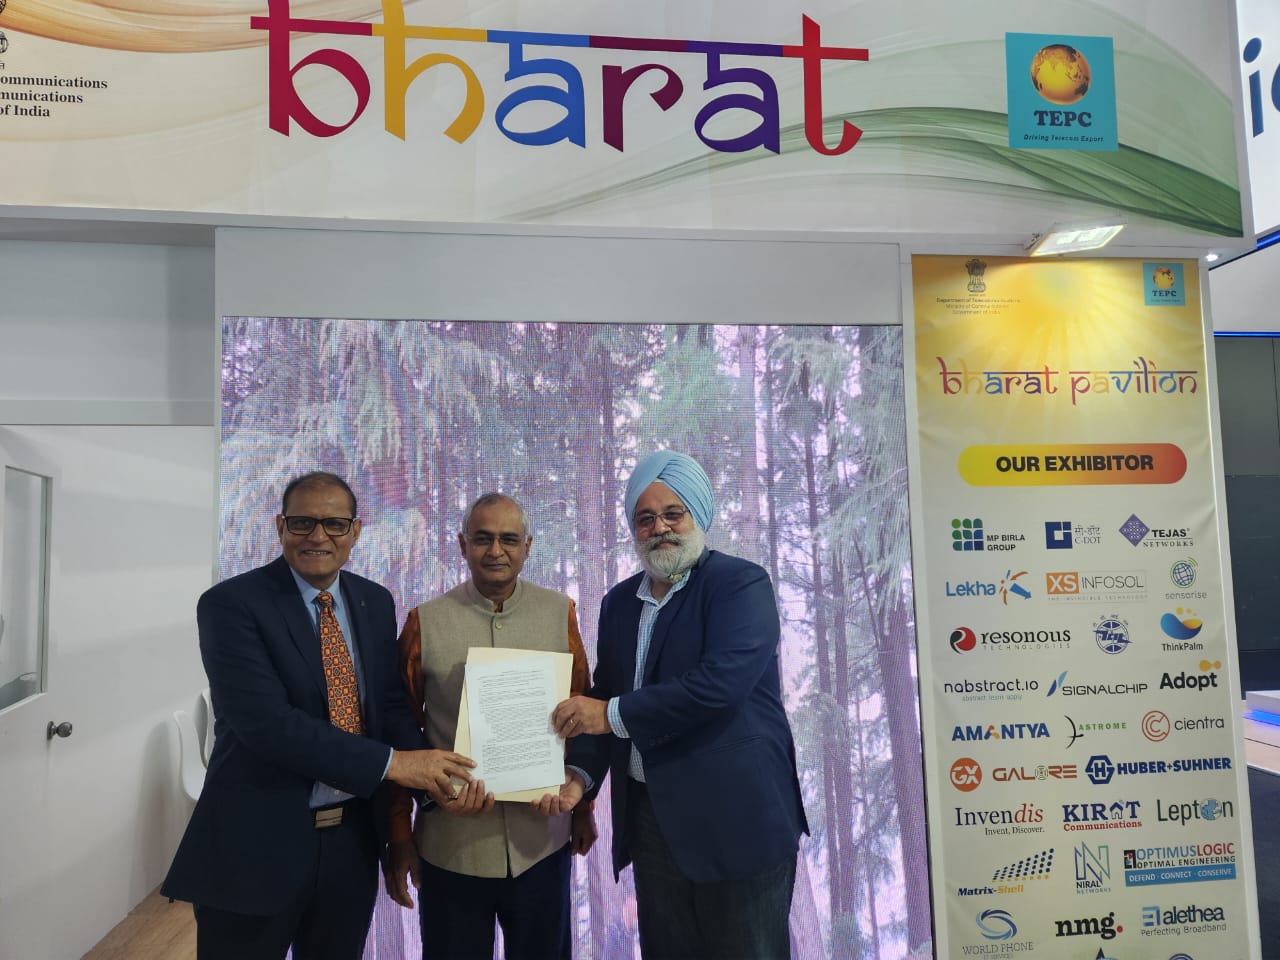 C-DOT and Qualcomm sign MoU towards Atmanirbhar Bharat and driving Design and Make in India Vision